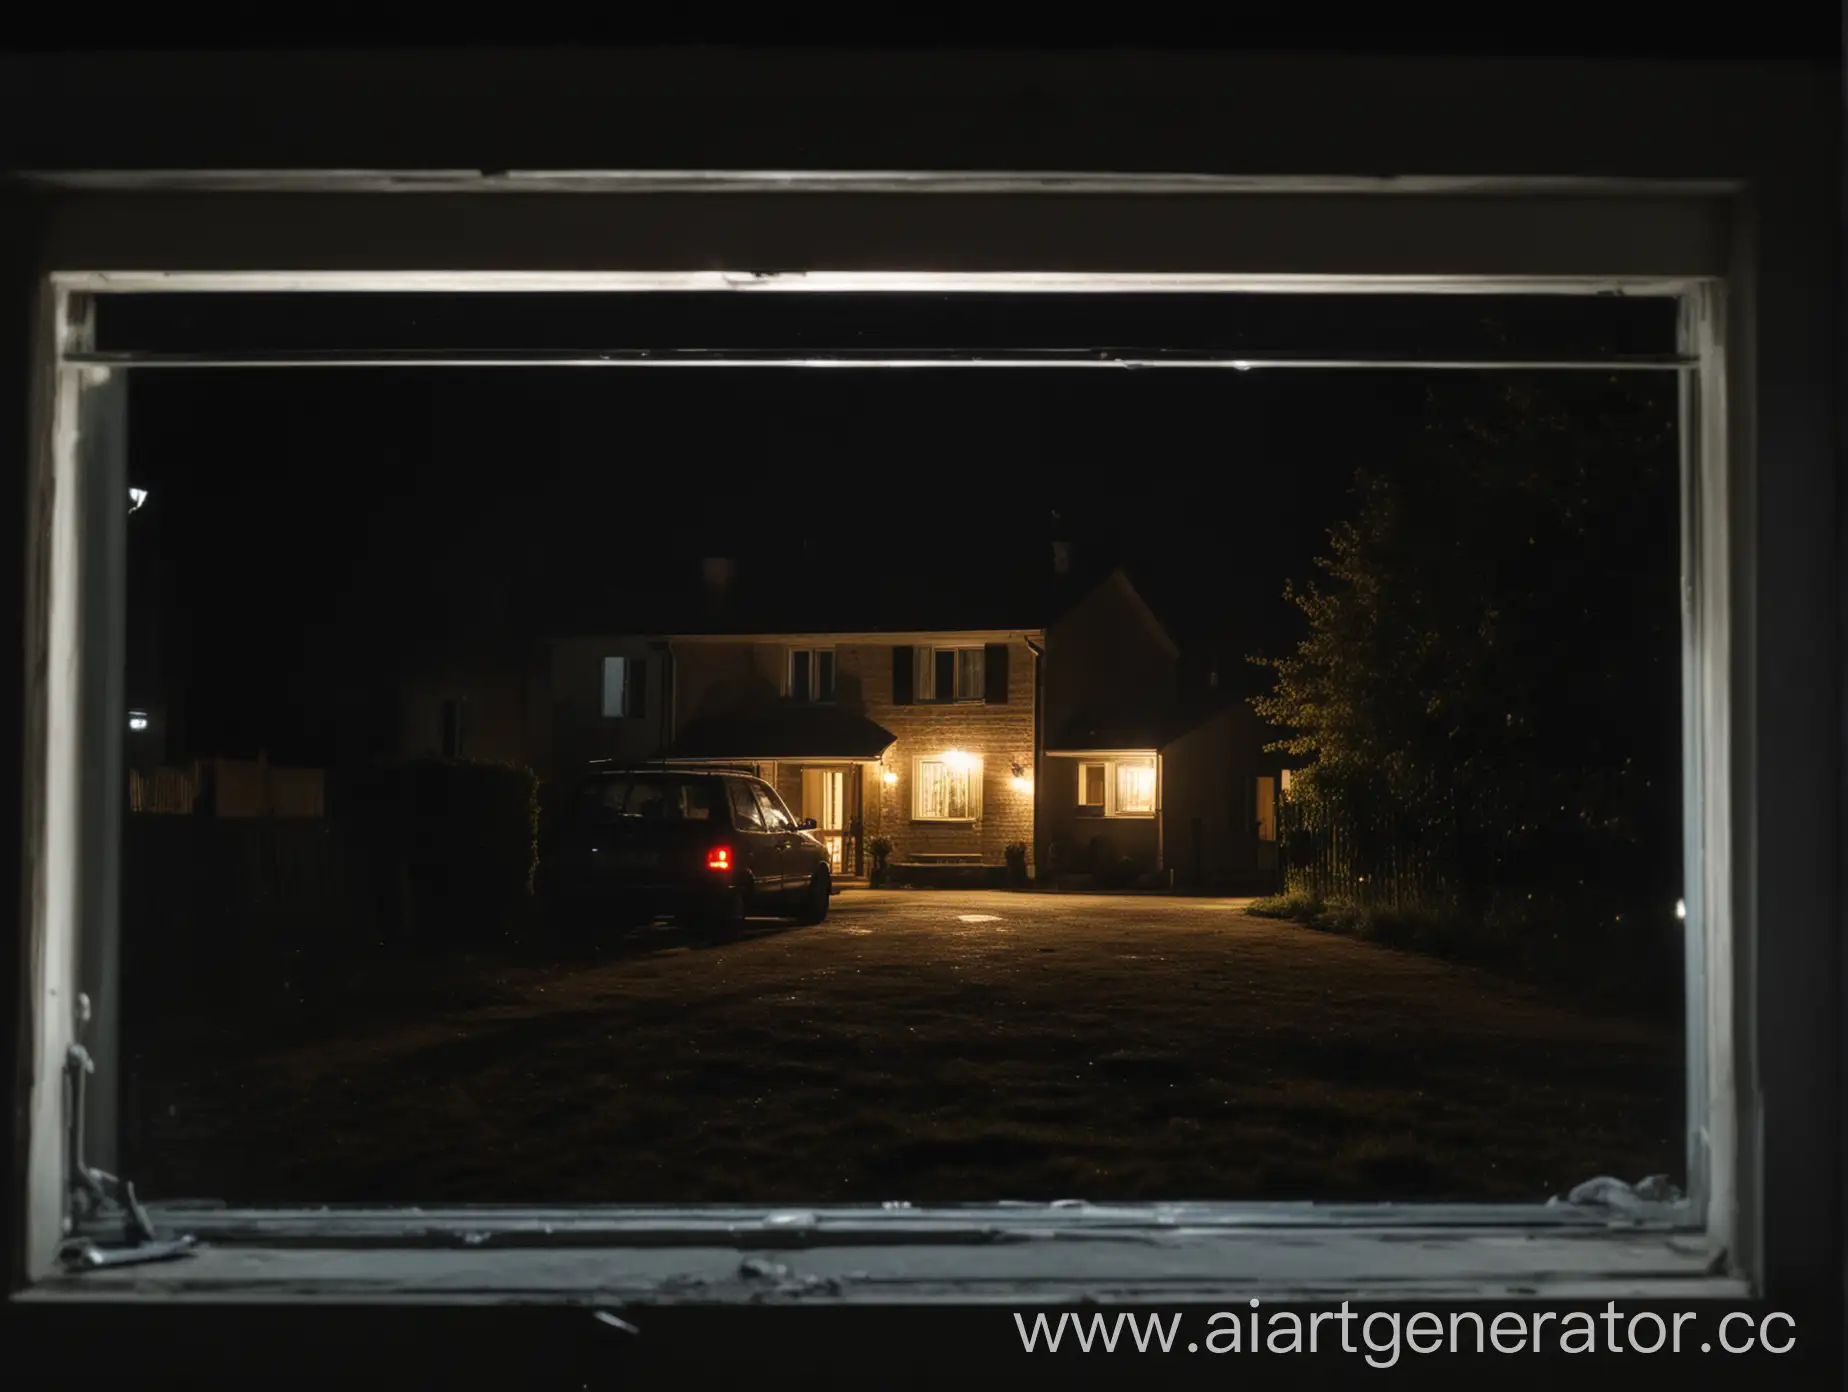 car at night near the house, view through the window, headlights on